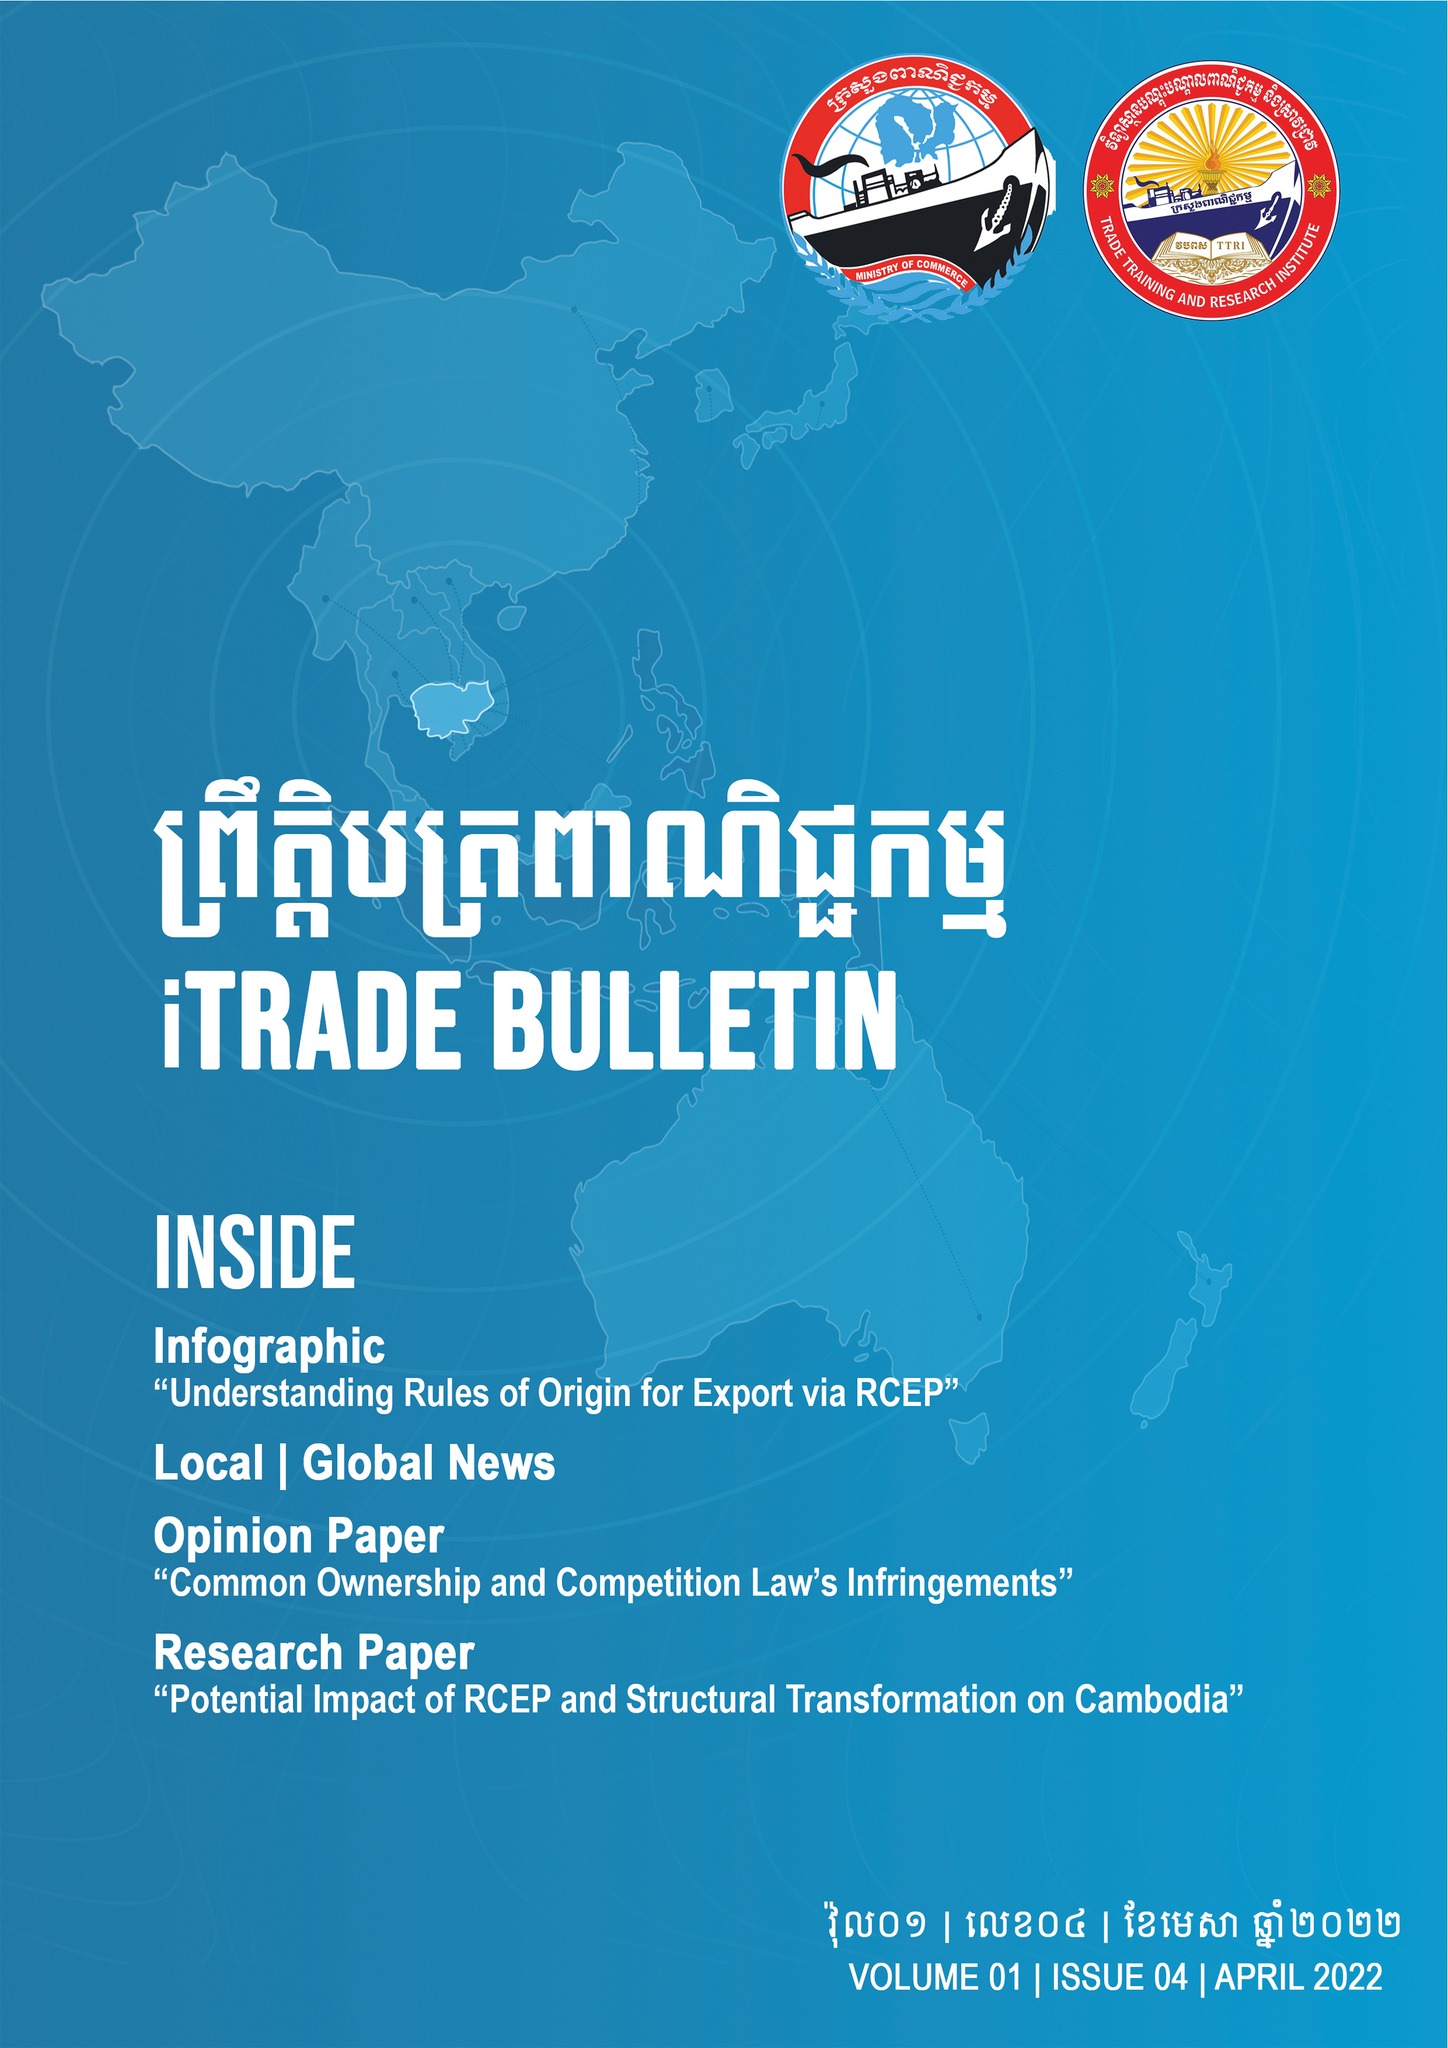 iTrade Bulletin No 04 (in Khmer and English) for  April 2022